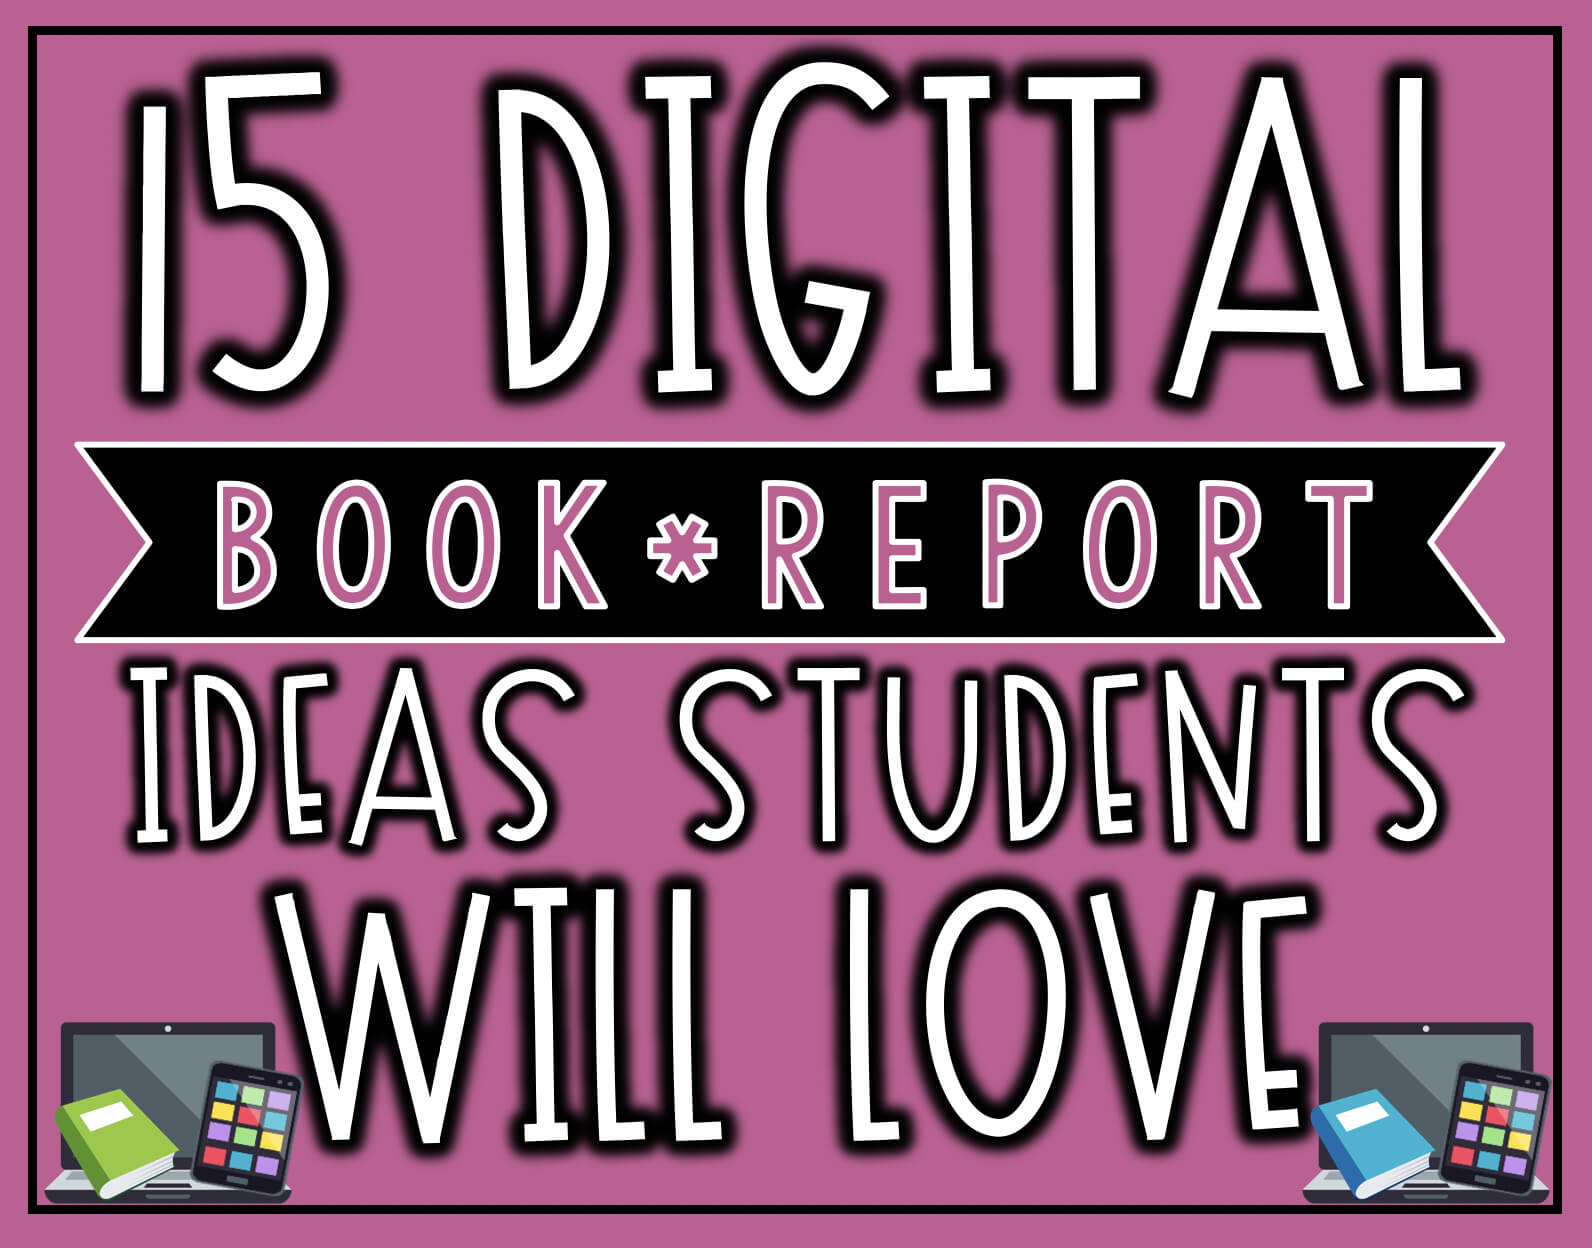 15 Digital Book Report Ideas Your Students Will Love | The In Book Report Template In Spanish